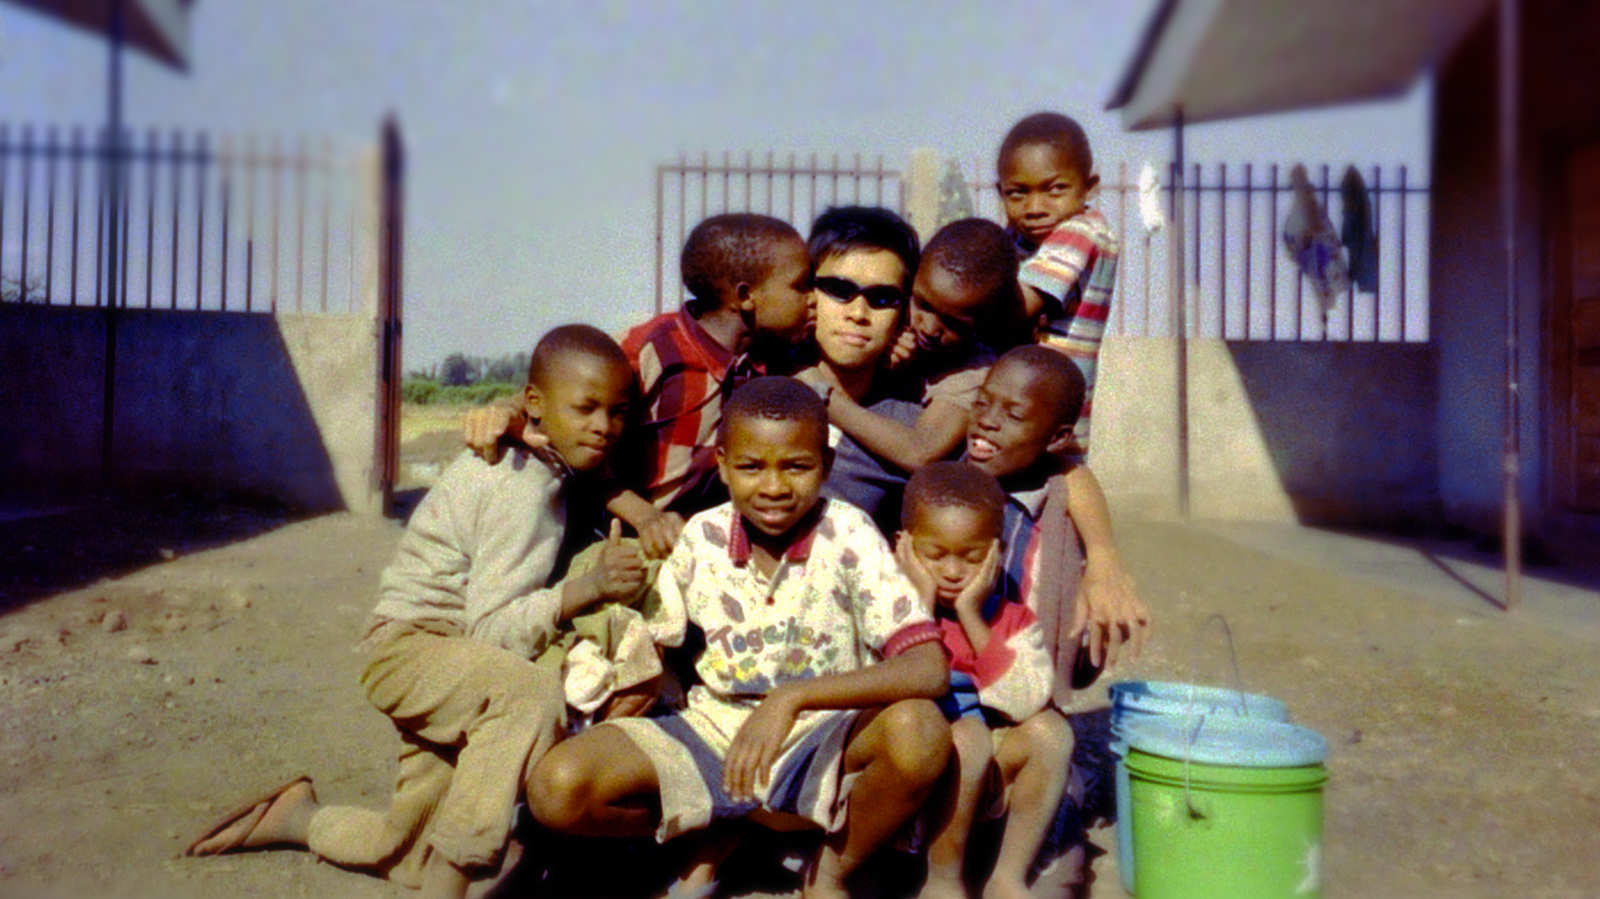 Local filmmaker hopes to hand African orphans their biggest break in life